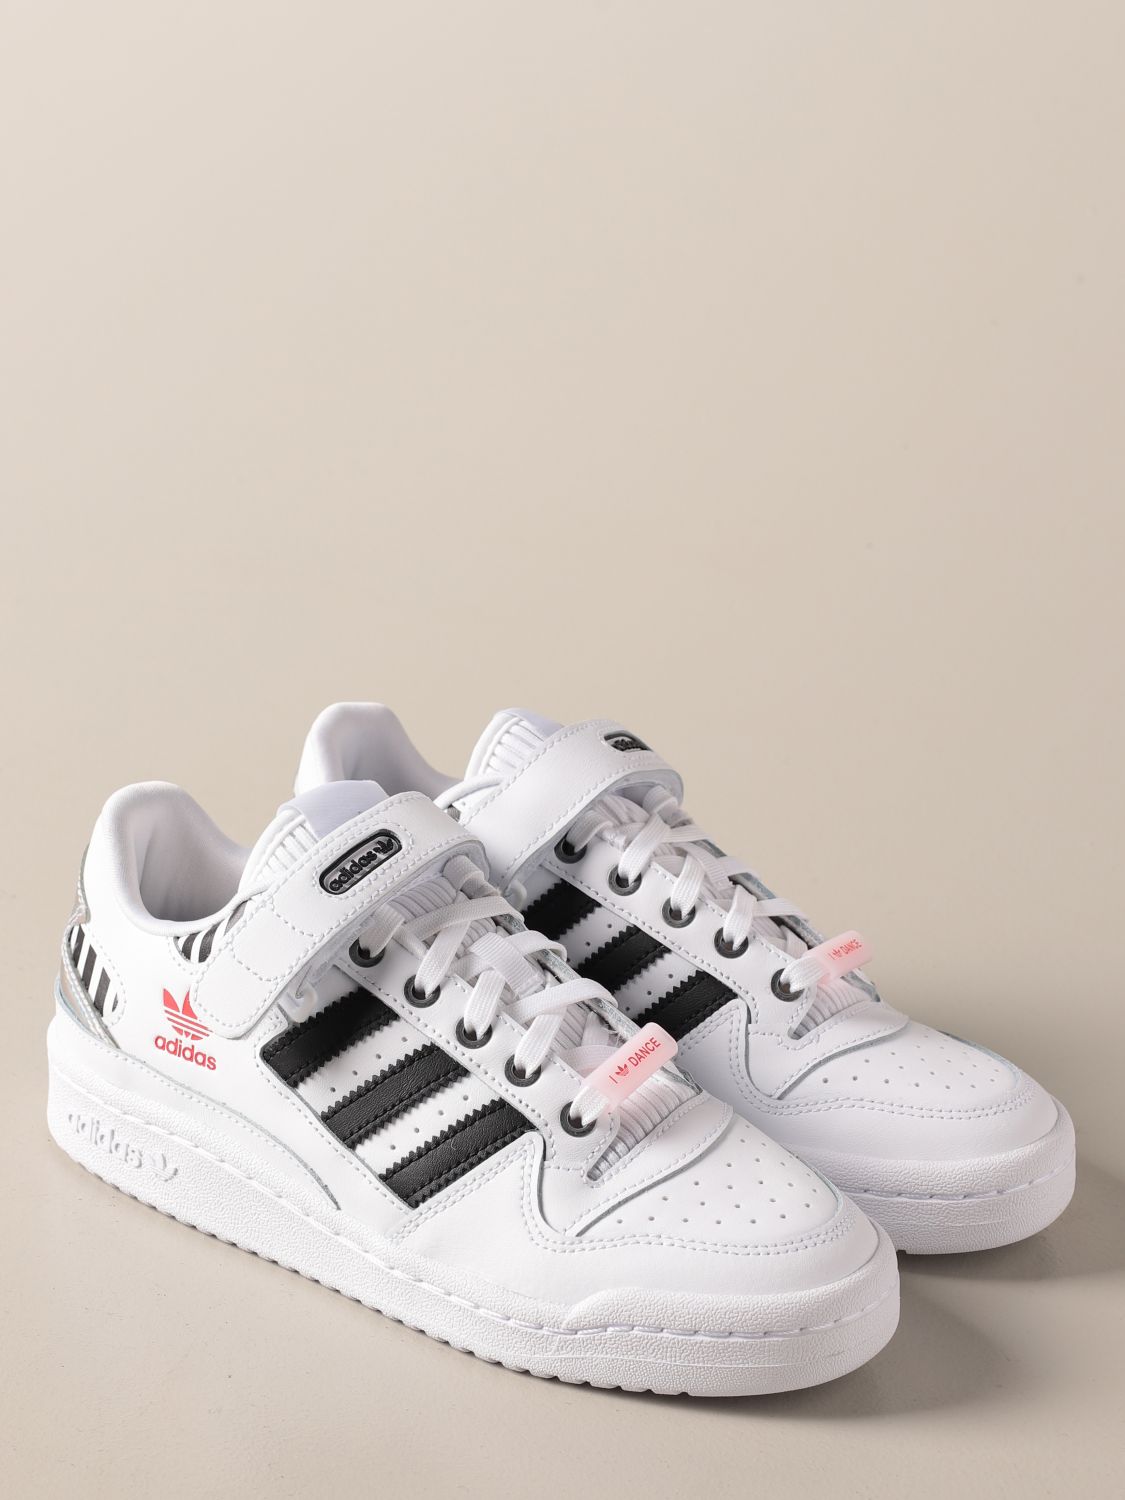 ik heb nodig Roest vlot ADIDAS ORIGINALS: Forum sneakers in rubberized leather - White | Adidas  Originals sneakers FZ3908 online on GIGLIO.COM